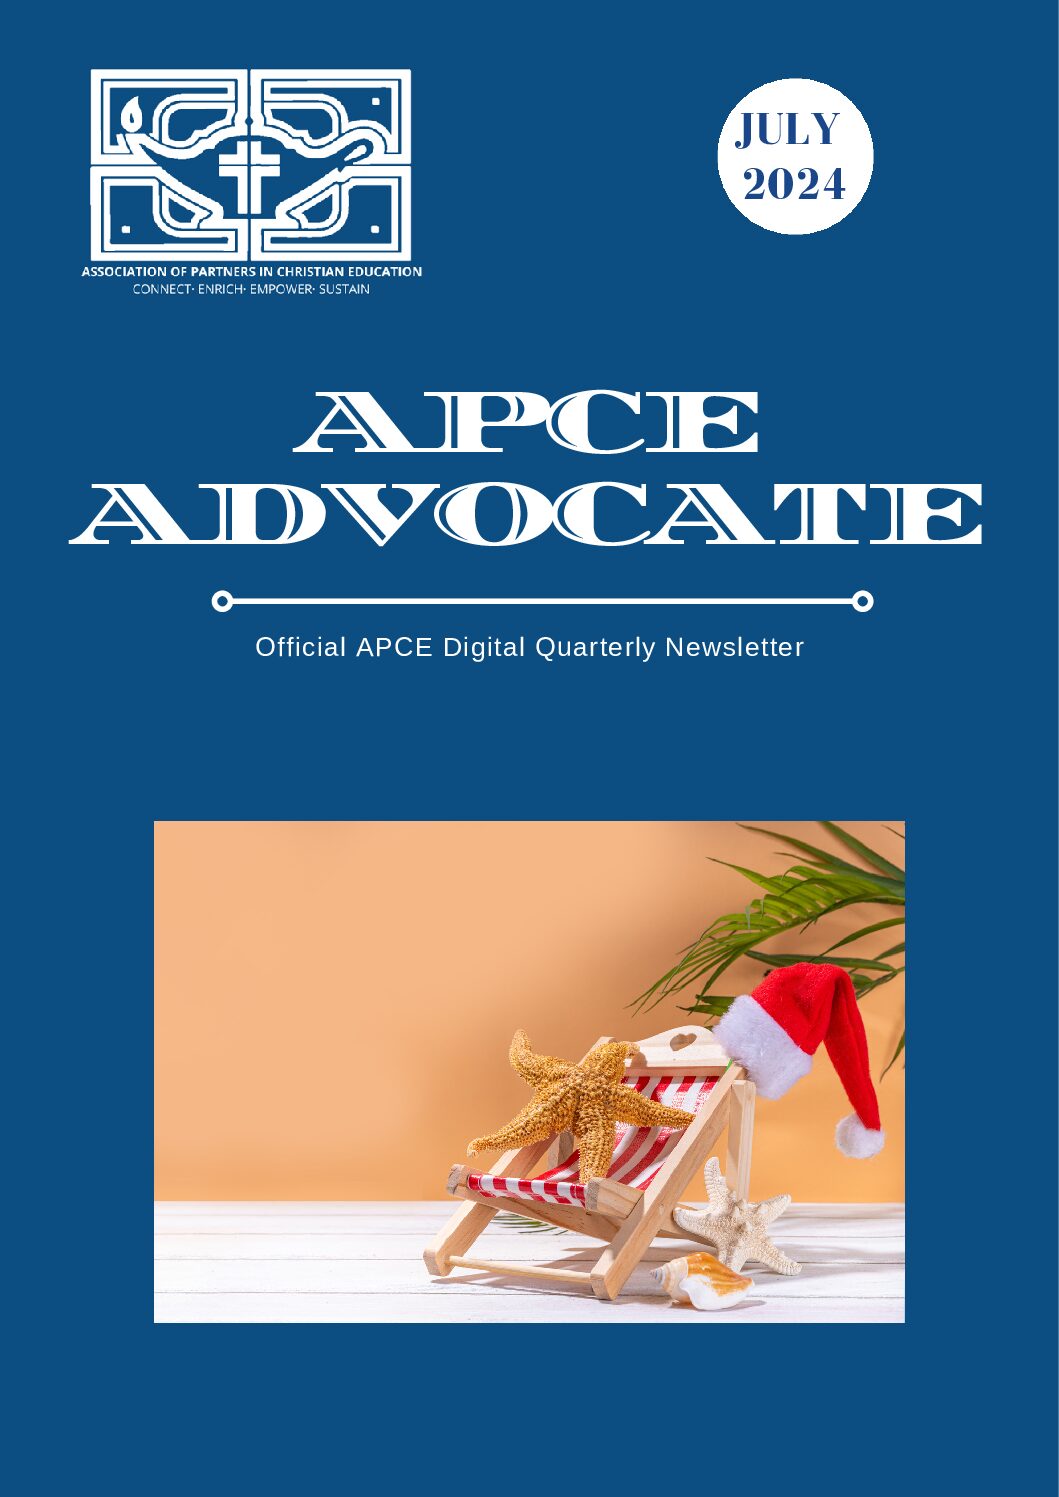 Advocate Issue July 2024